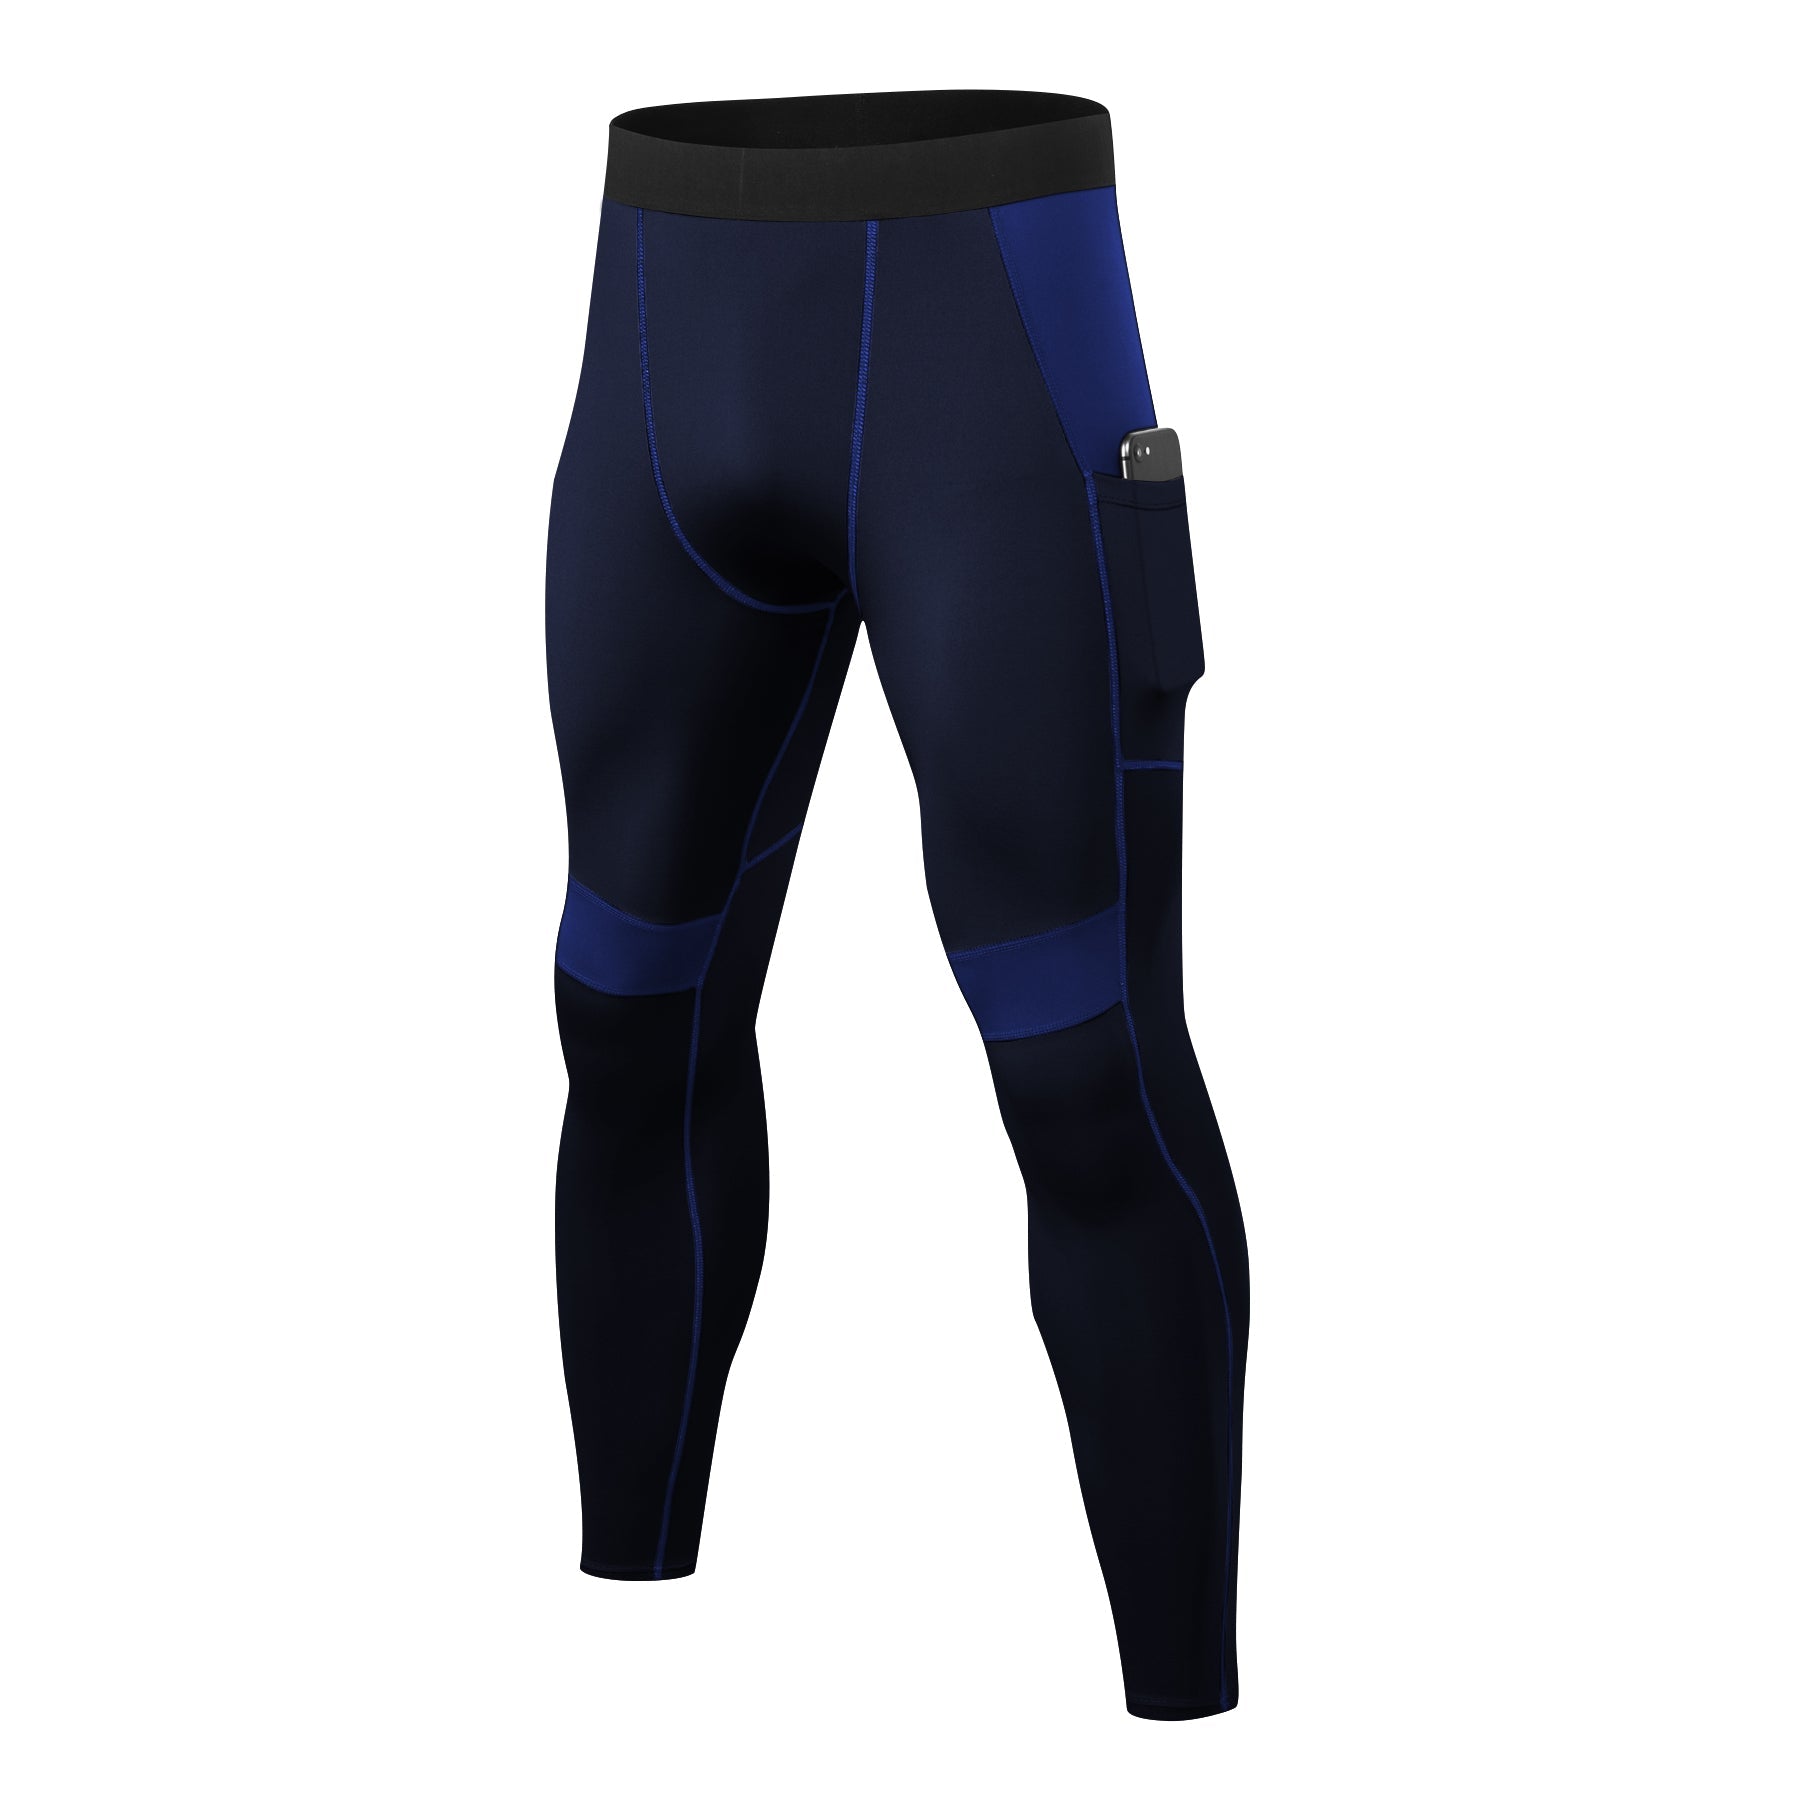 Mens Compression Pants Running Tights Workout Leggings Quick-Dry Baselayer  Waist Elsatic Splice Underwear with Pocket